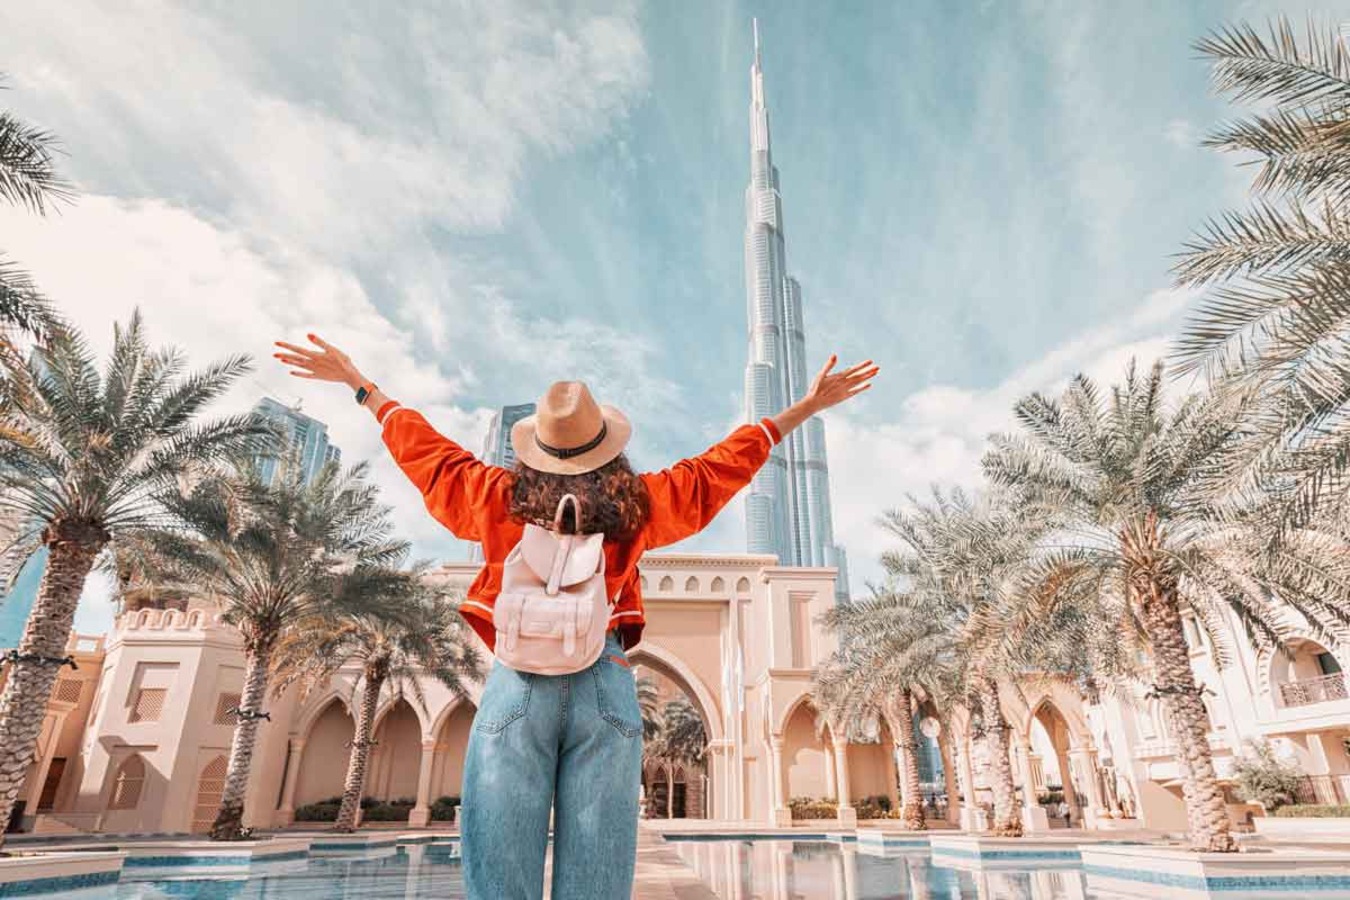 UAE influencers must pay tax and register with government or risk 5 years in prison